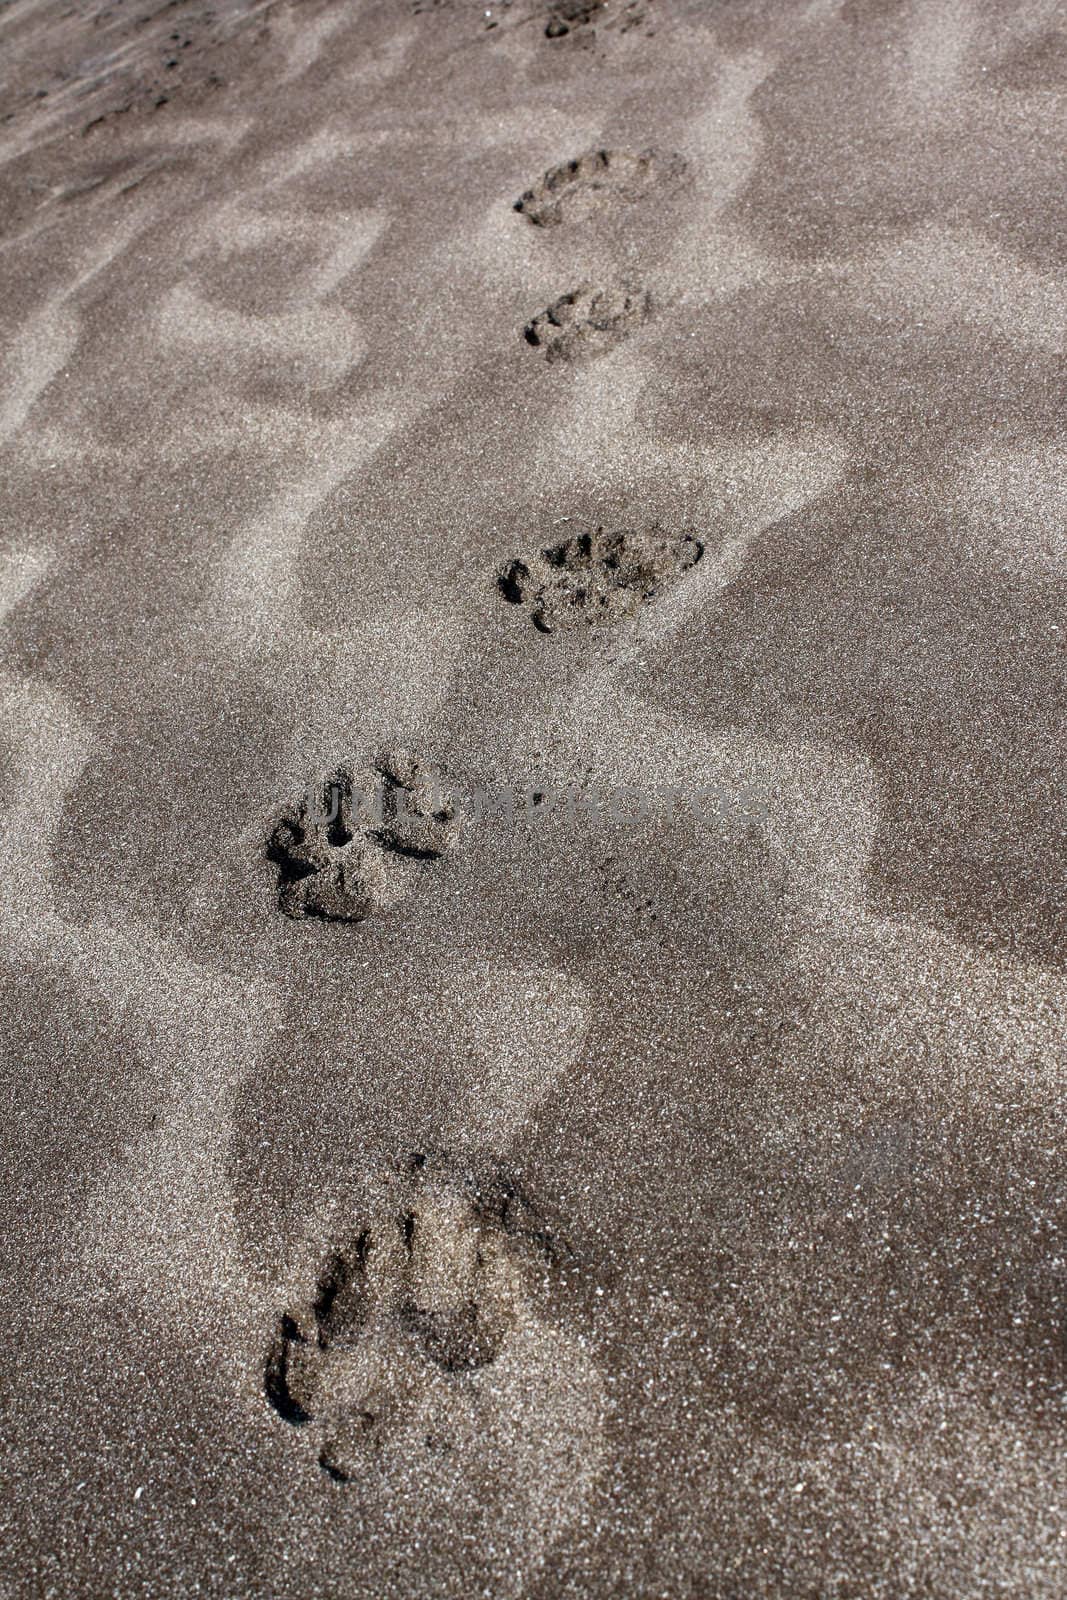 Pugmarks of an animal in the beach sand.